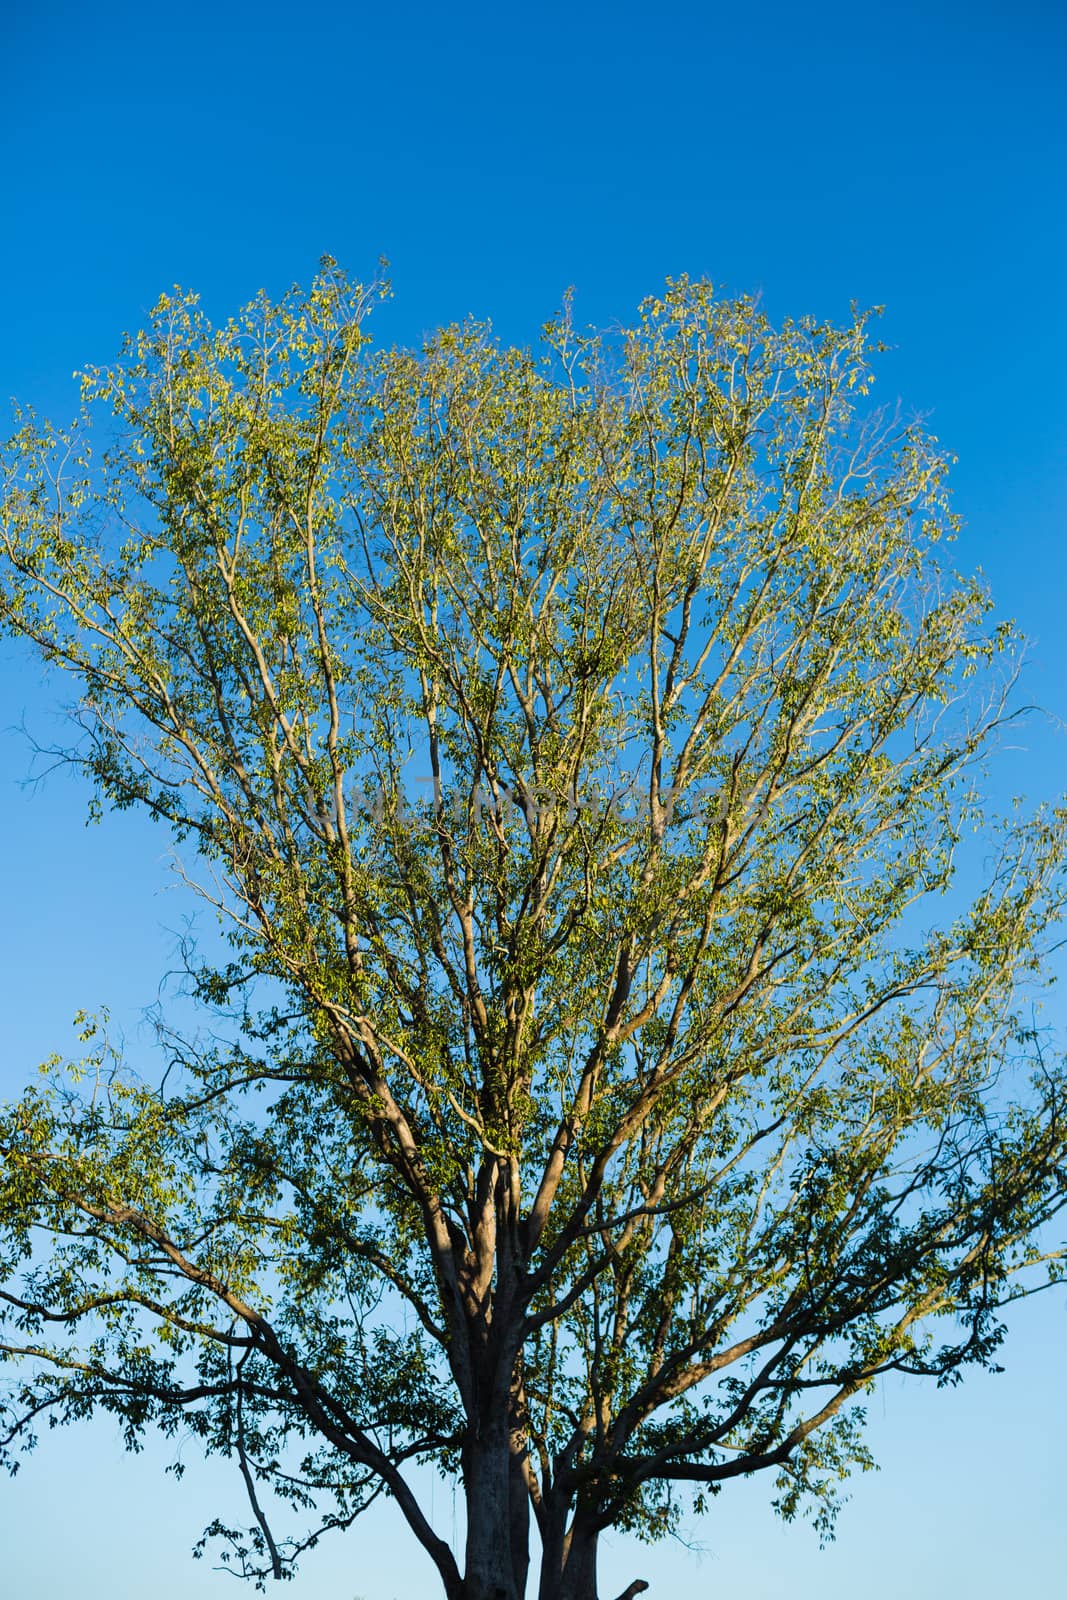 high tree with blue sky in background